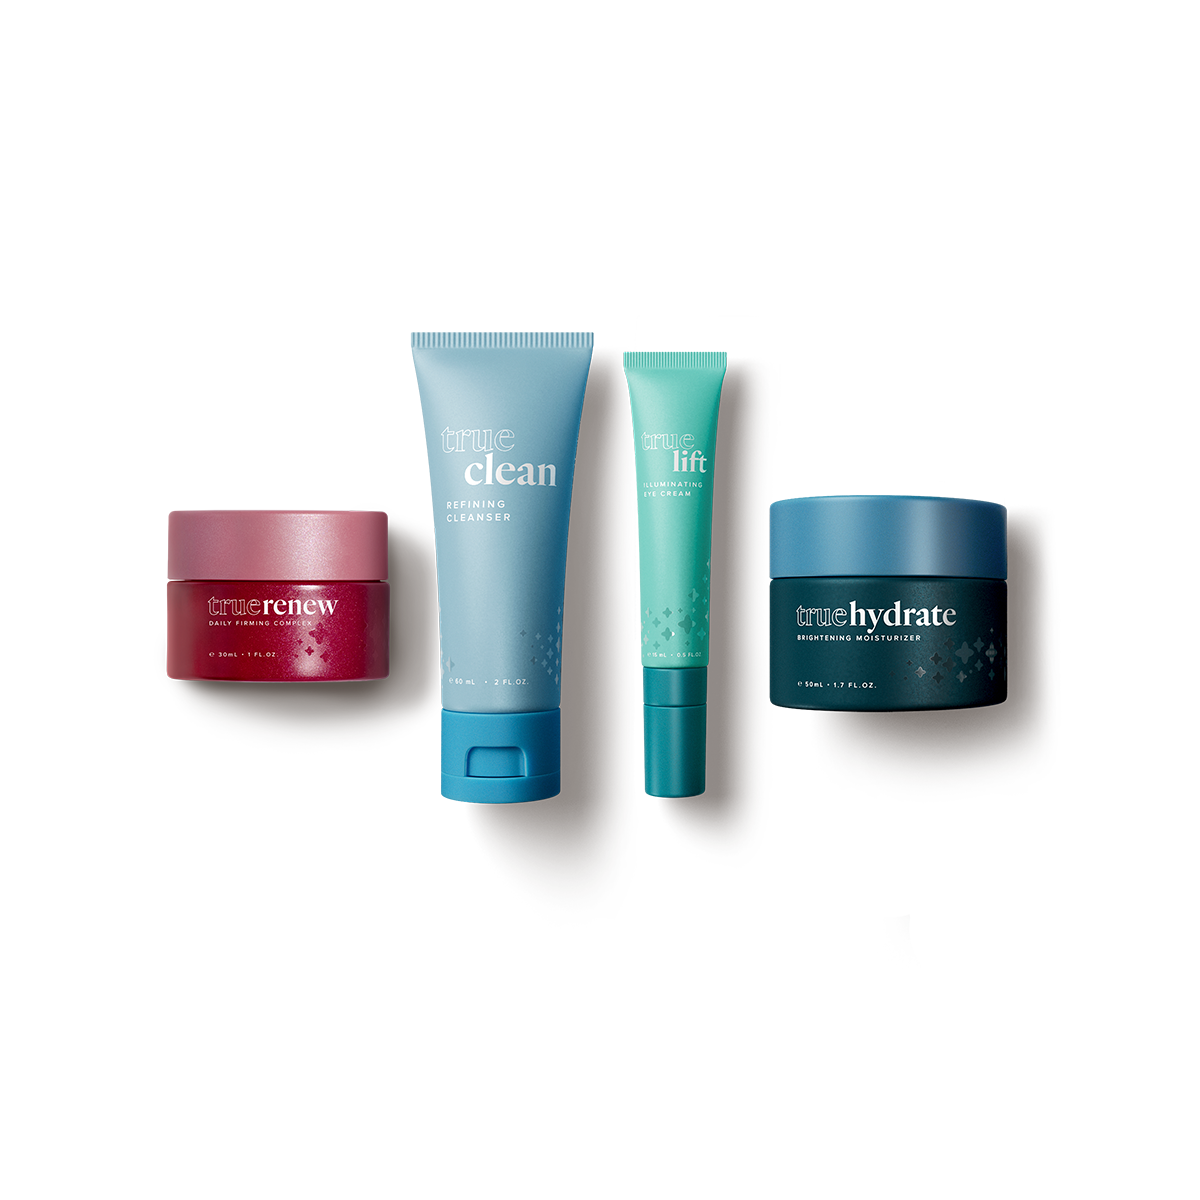 LifeVantage TrueScience Activated Skin Care Collection